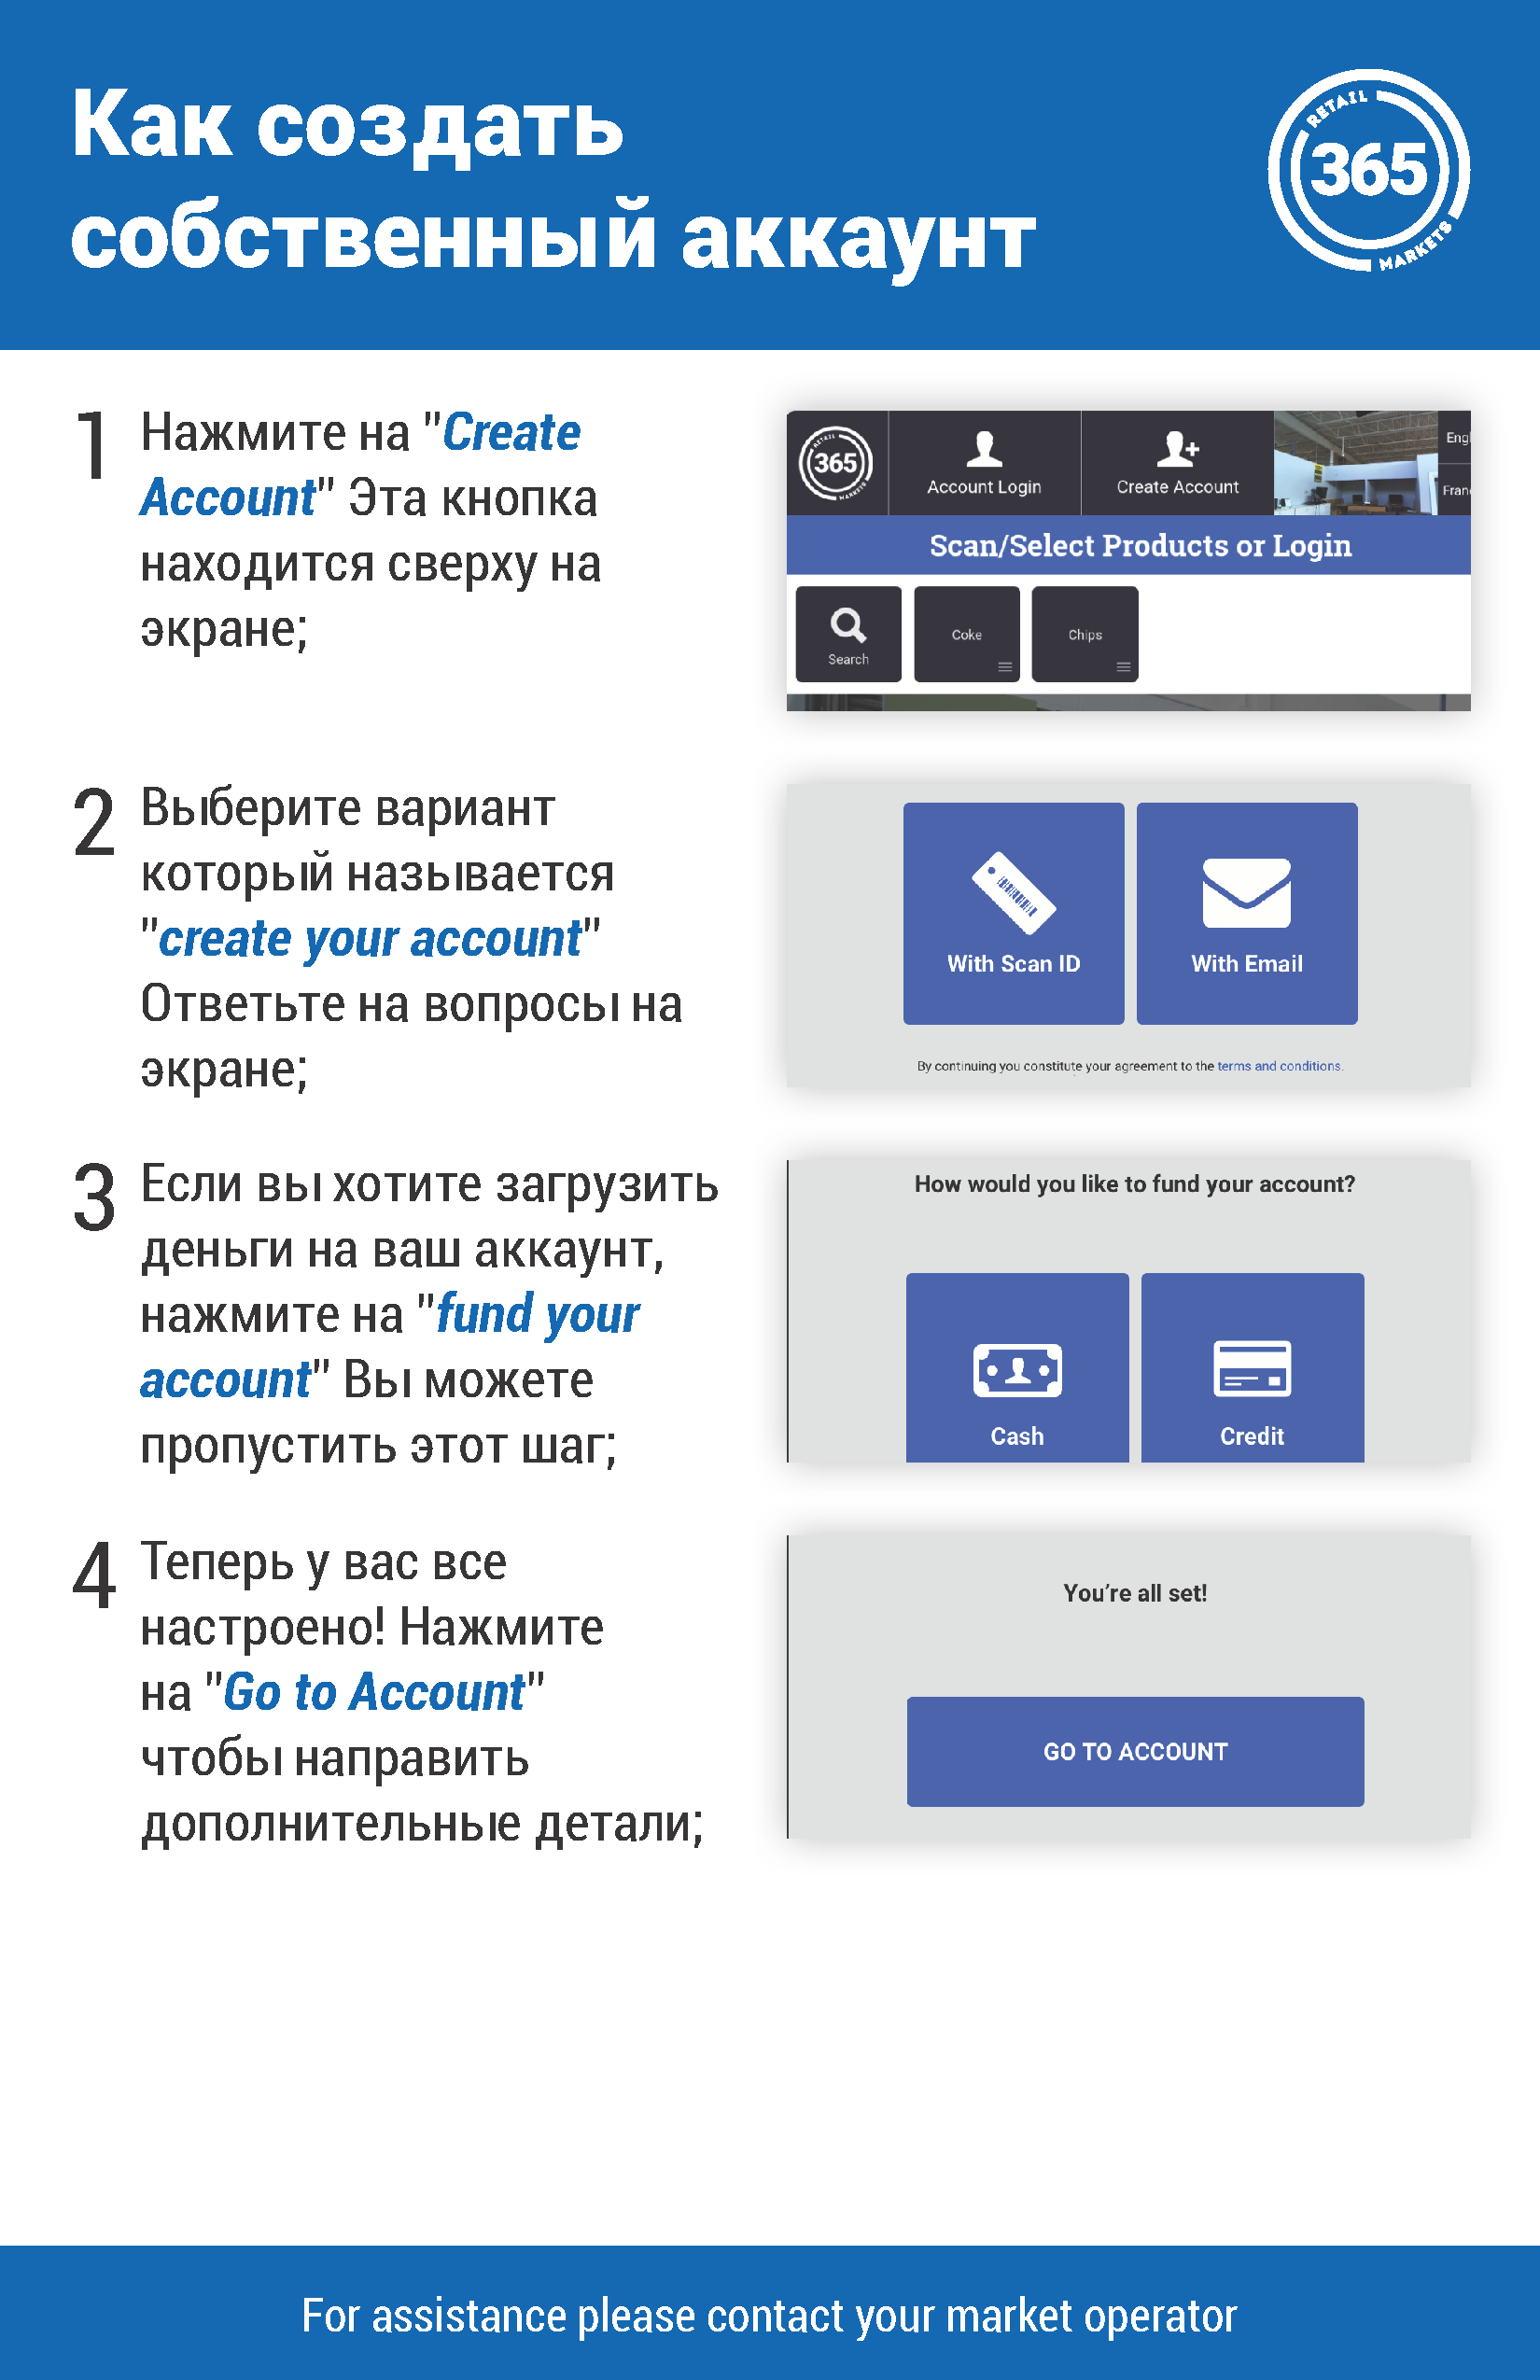 WingCards-V5-CreateAccount-365-Russian.png